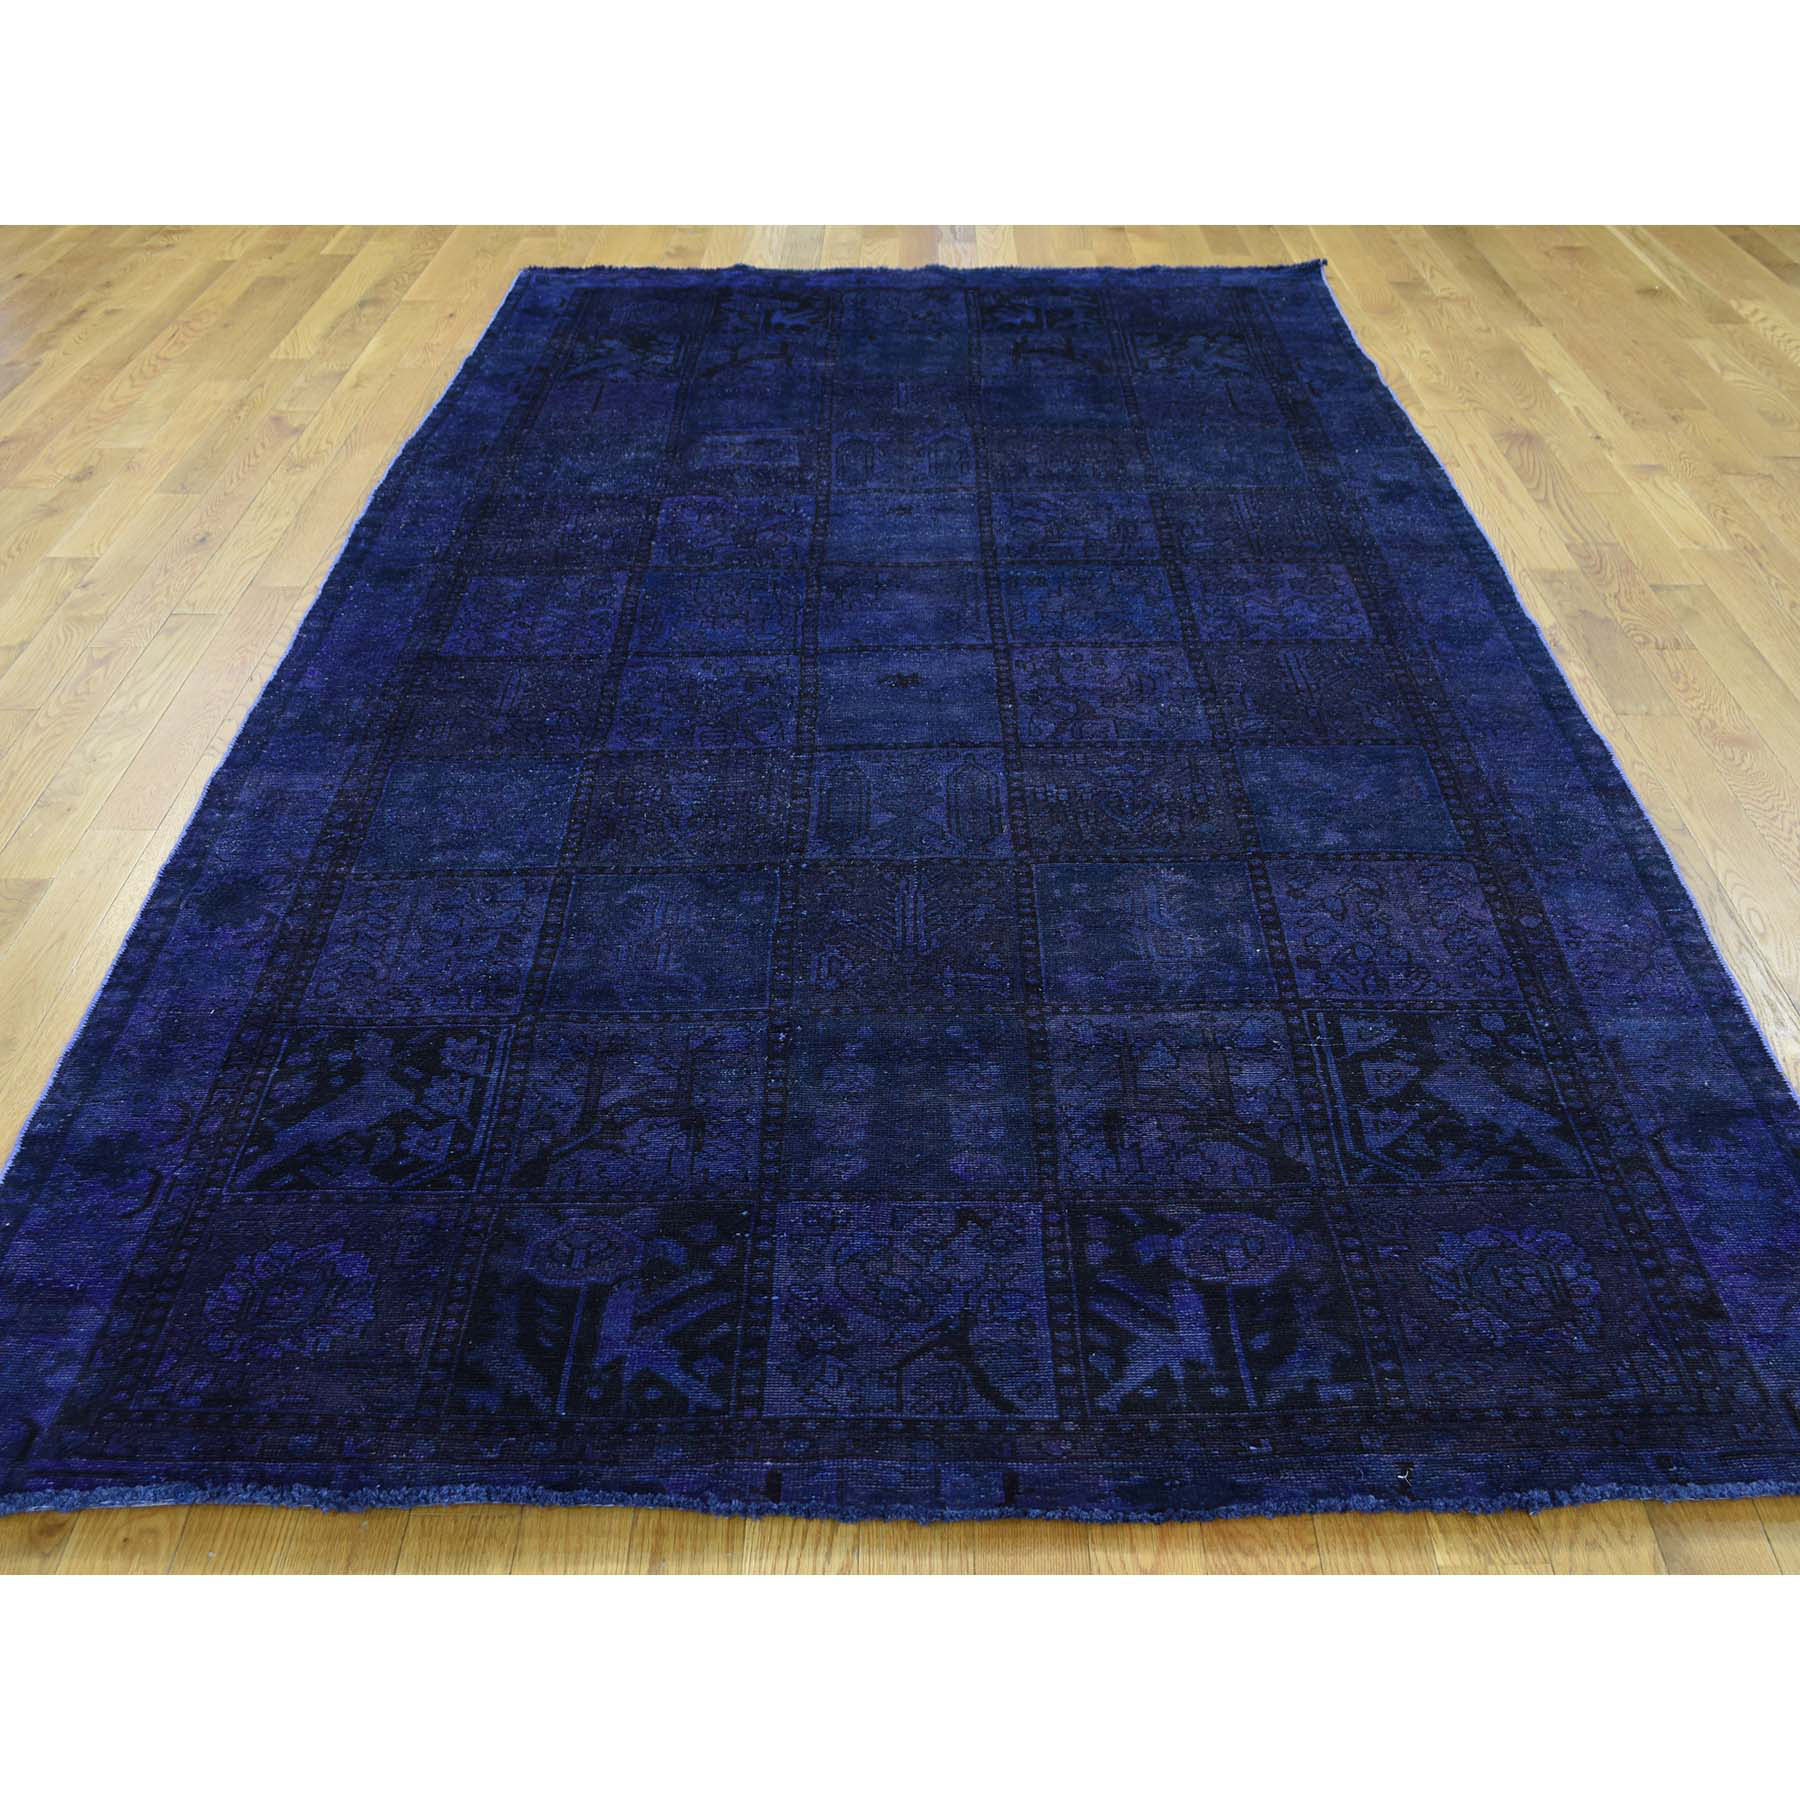 5-6 x10- On clearance Hand-Knotted Bakhtiari Garden Design Overdyed Wide Runner Rug 